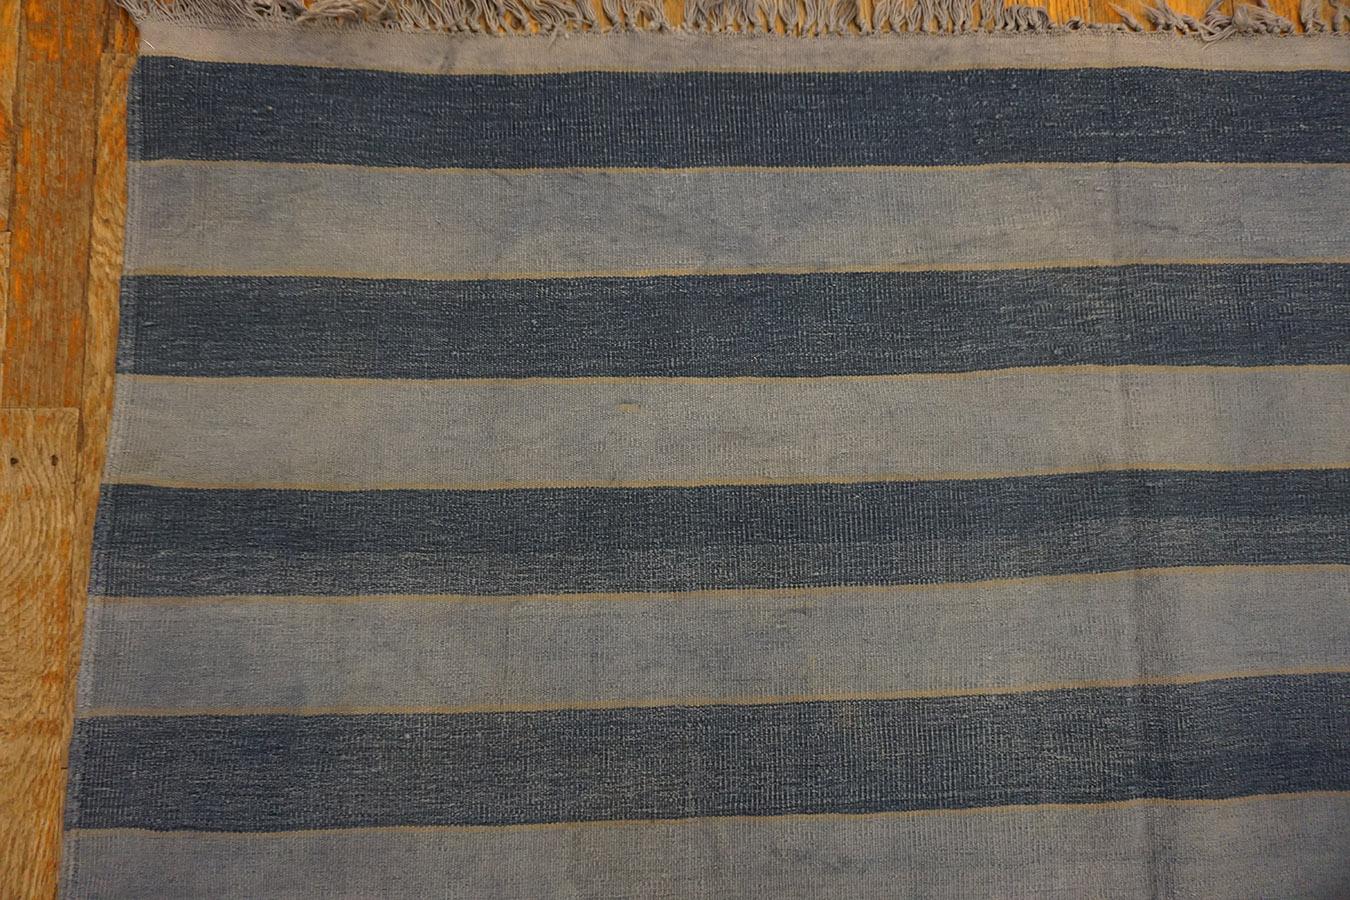 Early 20th Century Indian Cotton Dhurrie Carpet ( 9'10'' x 14'10